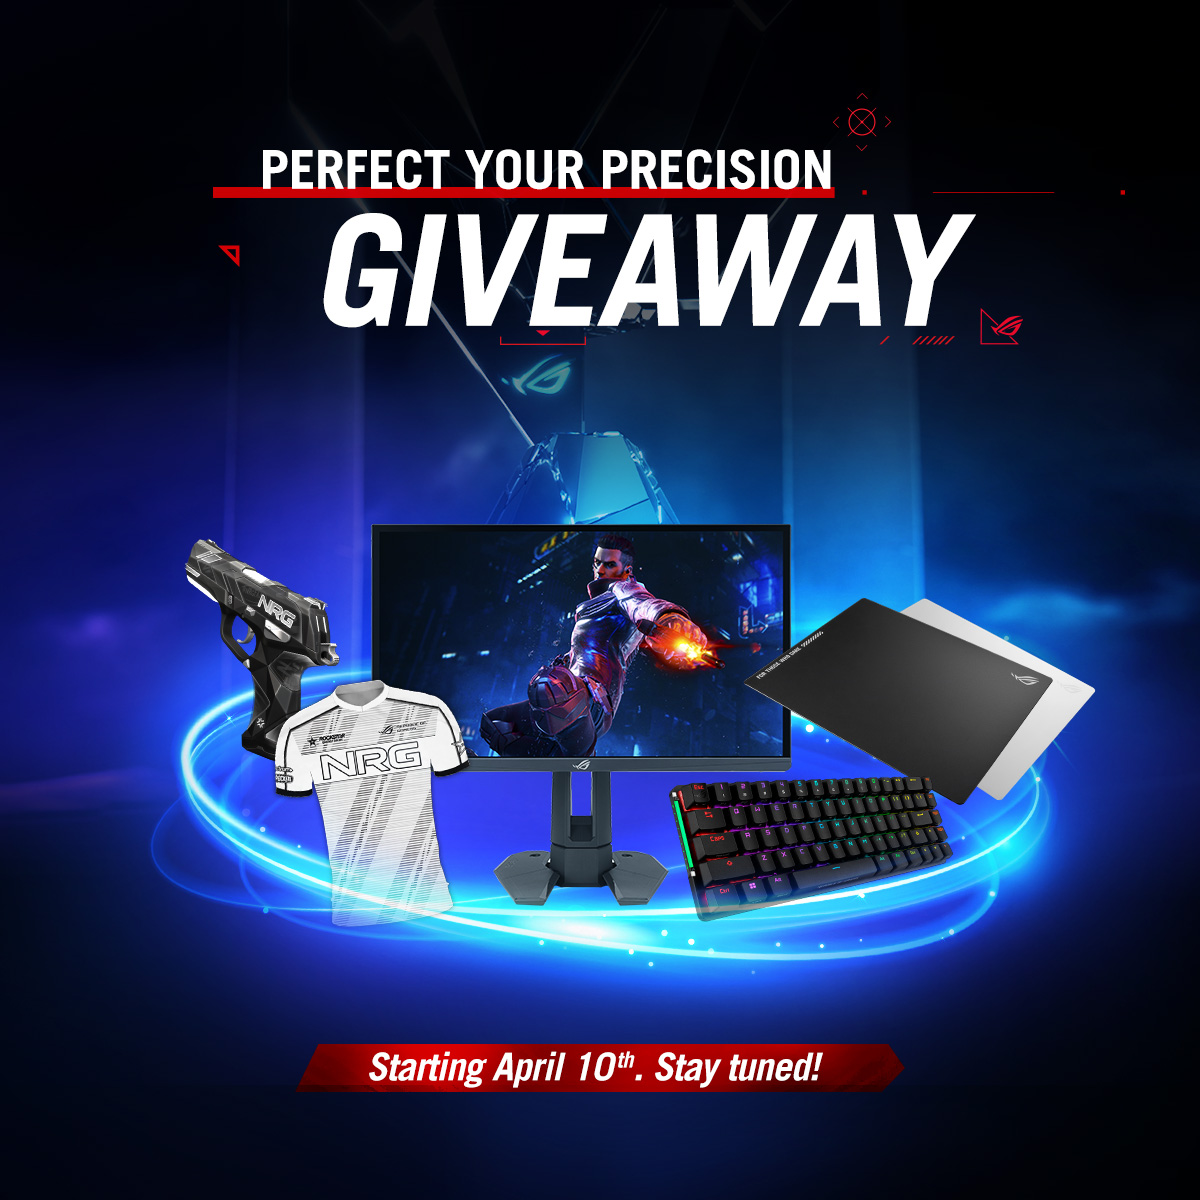 Conquer with the exclusive design of the #ROGPollingRateBooster!🖱️ ​ Allowing you to hook it up whichever way you want. ​How would you connect yours?😉👇🏻​ Wireless FTW Wireless with an extender Wired all the way Join the giveaway👉 rog.gg/PerfectYourPre…